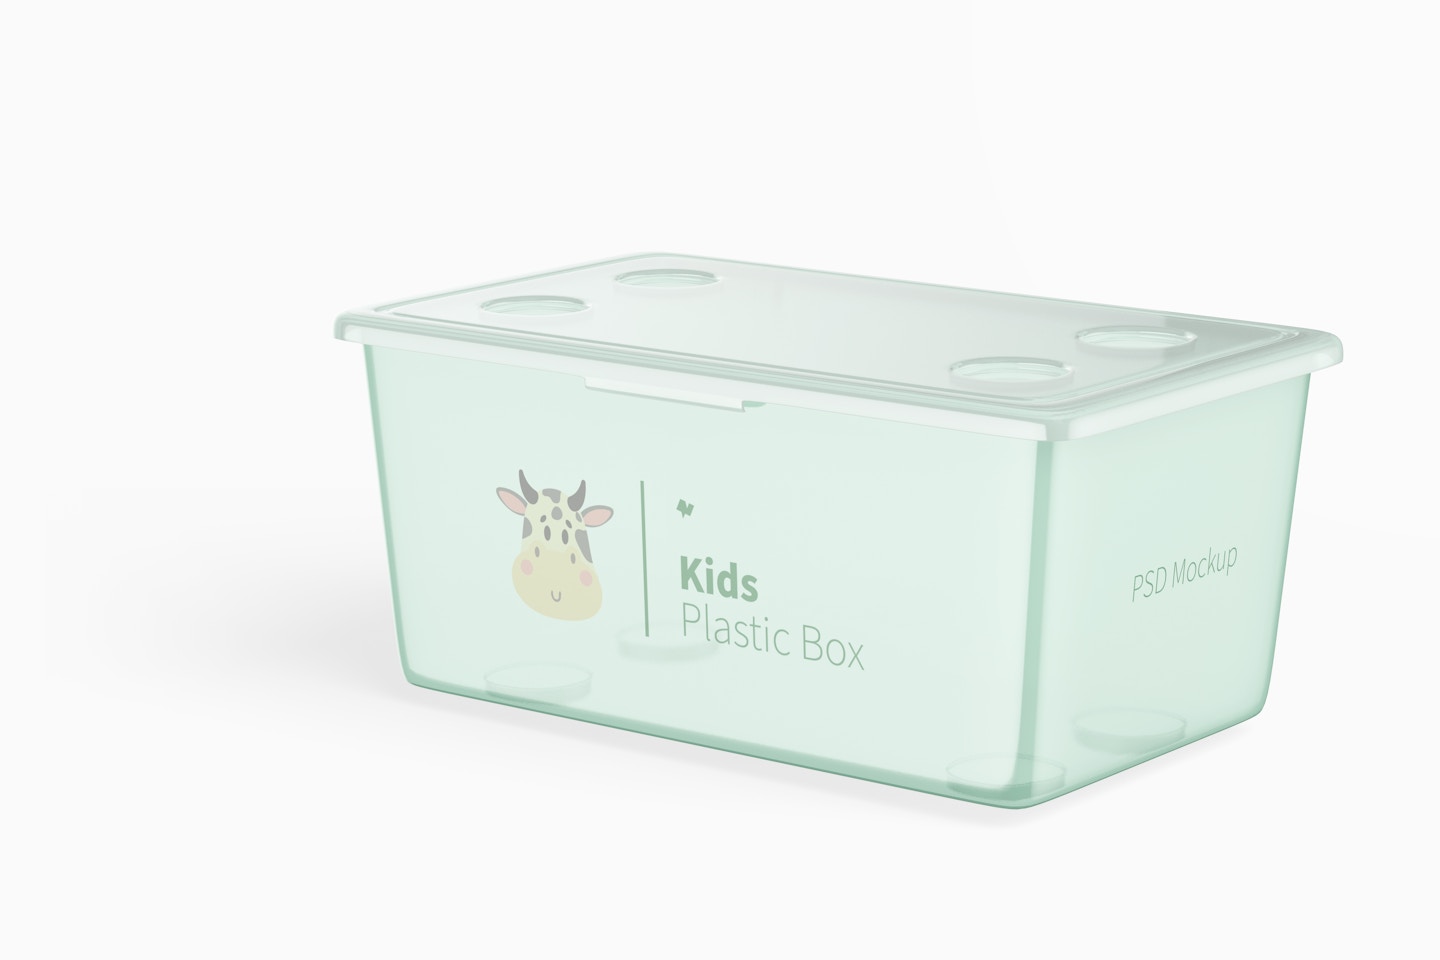 Kids Small Plastic Box with Lid Mockup, Right View